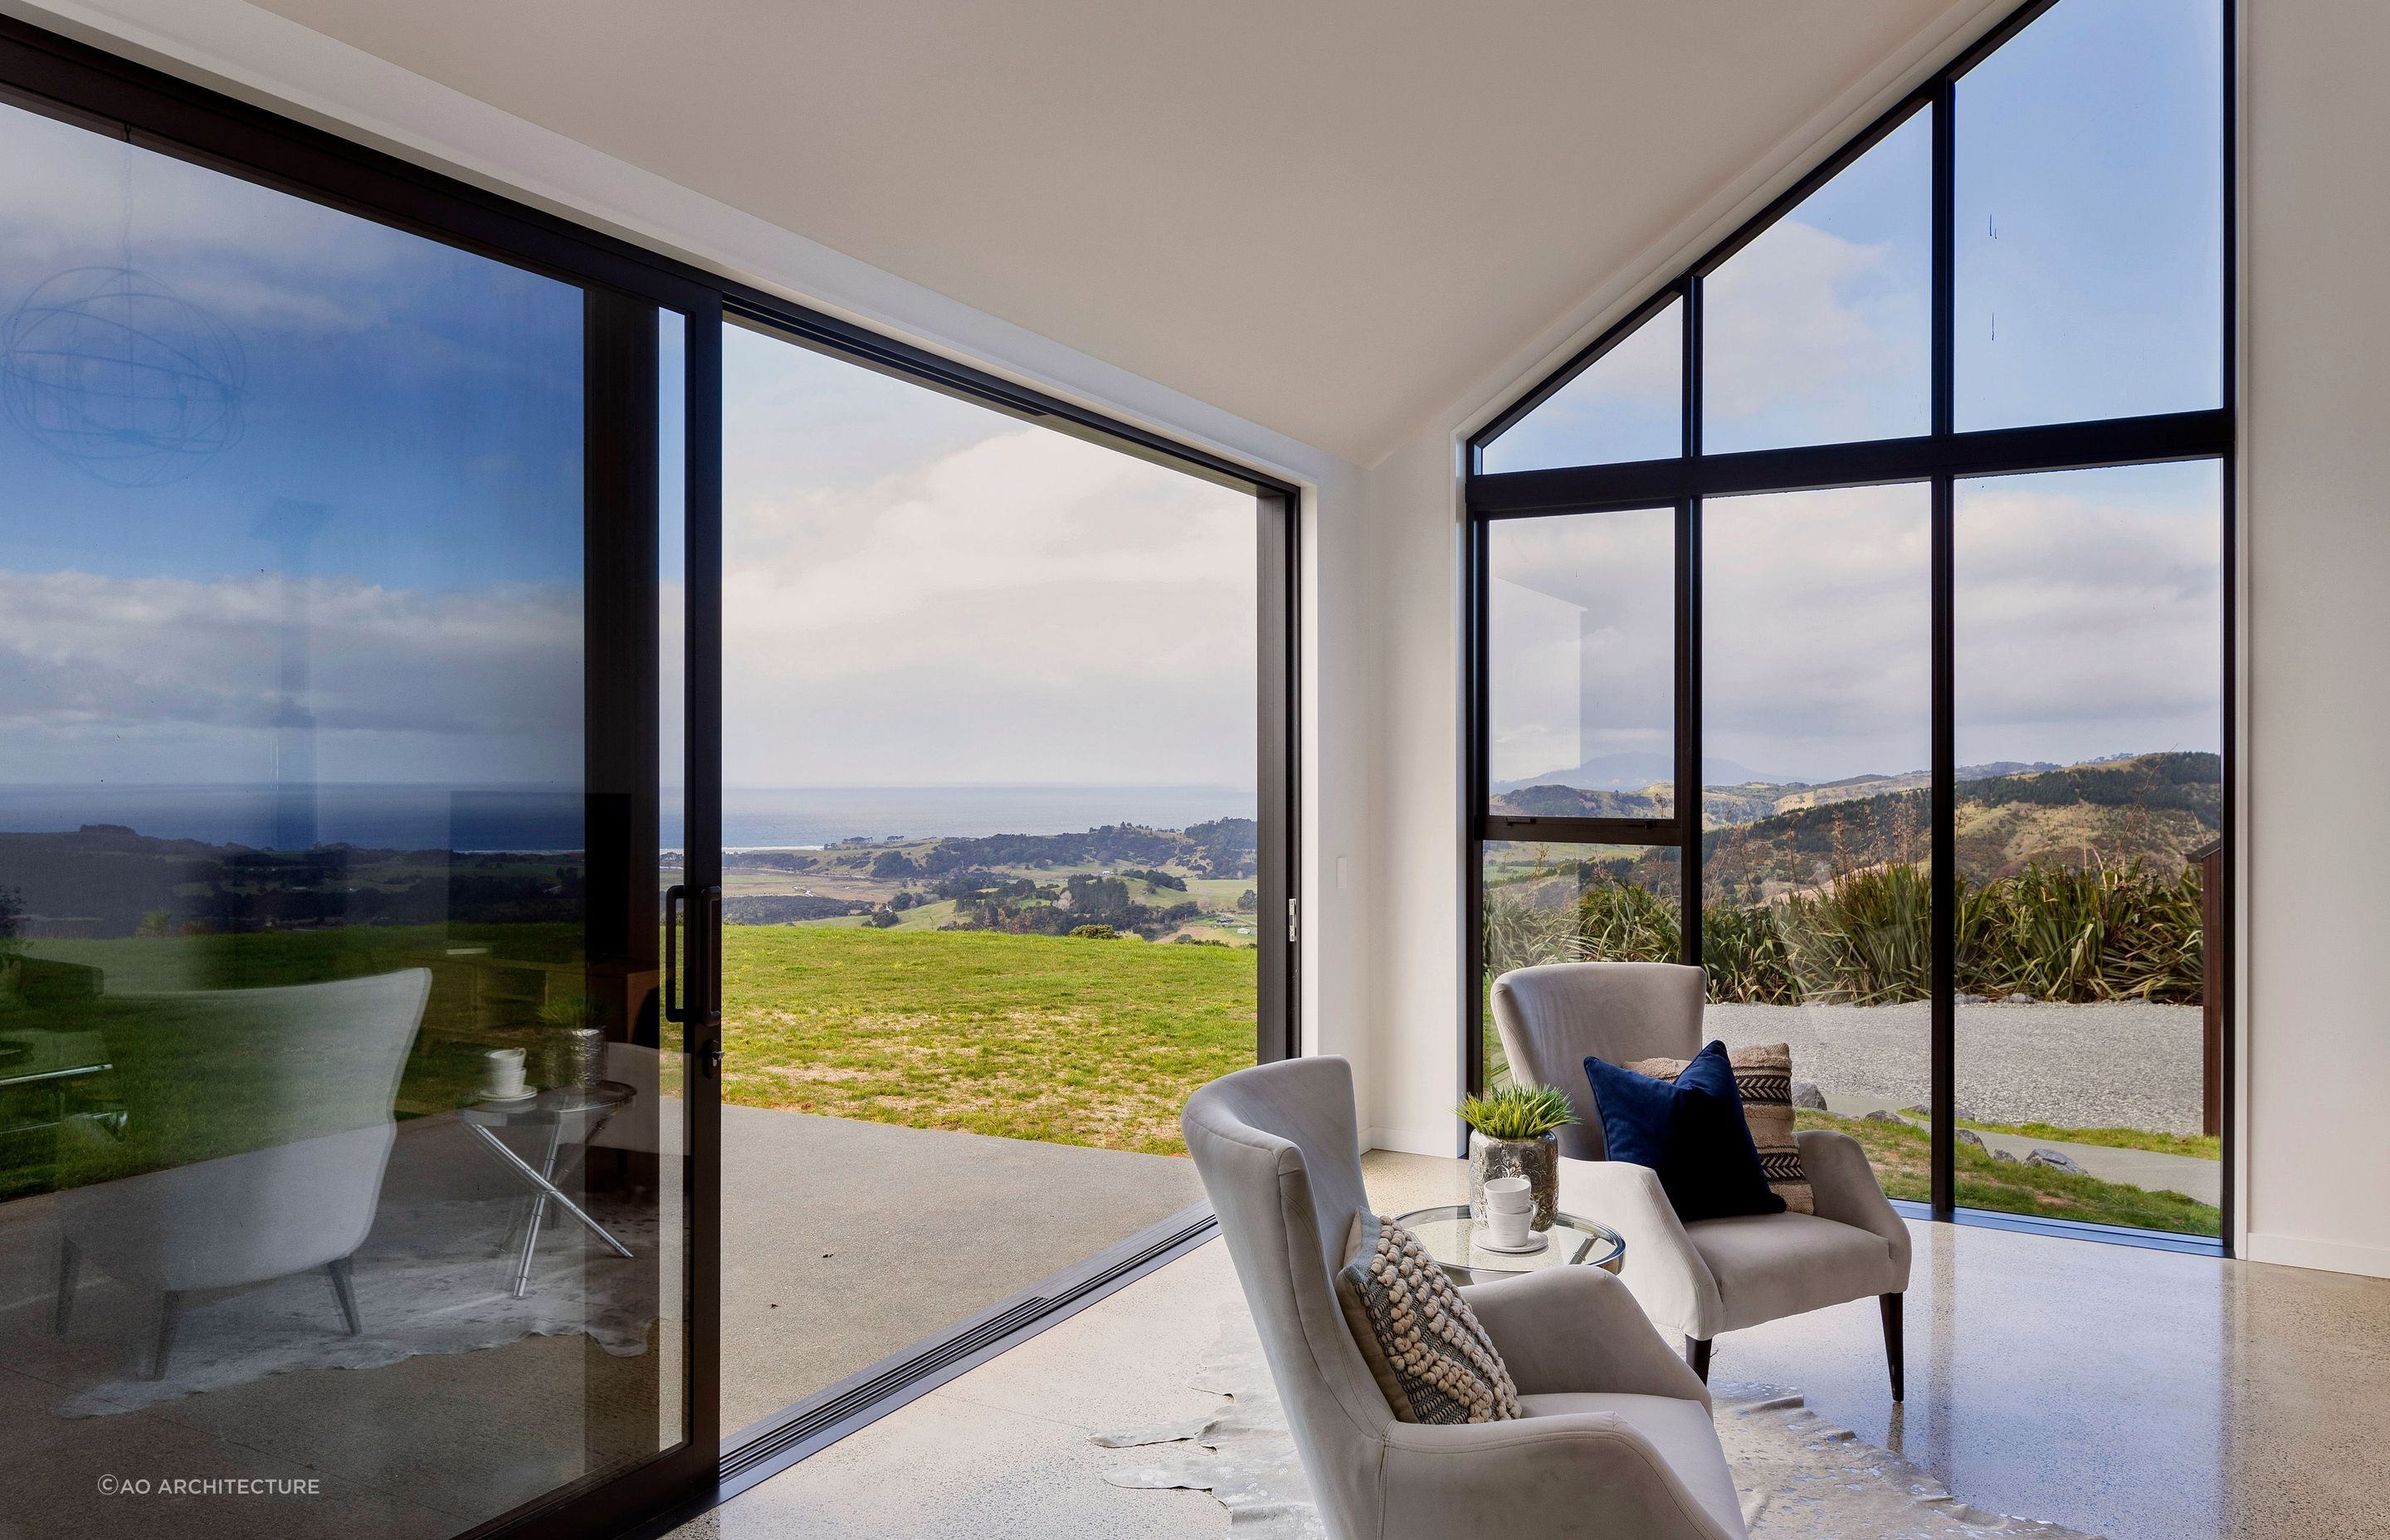 Glass sliding doors and full length windows allow the ocean views to be fully appreciated — Photography: Stephen Entwisle.